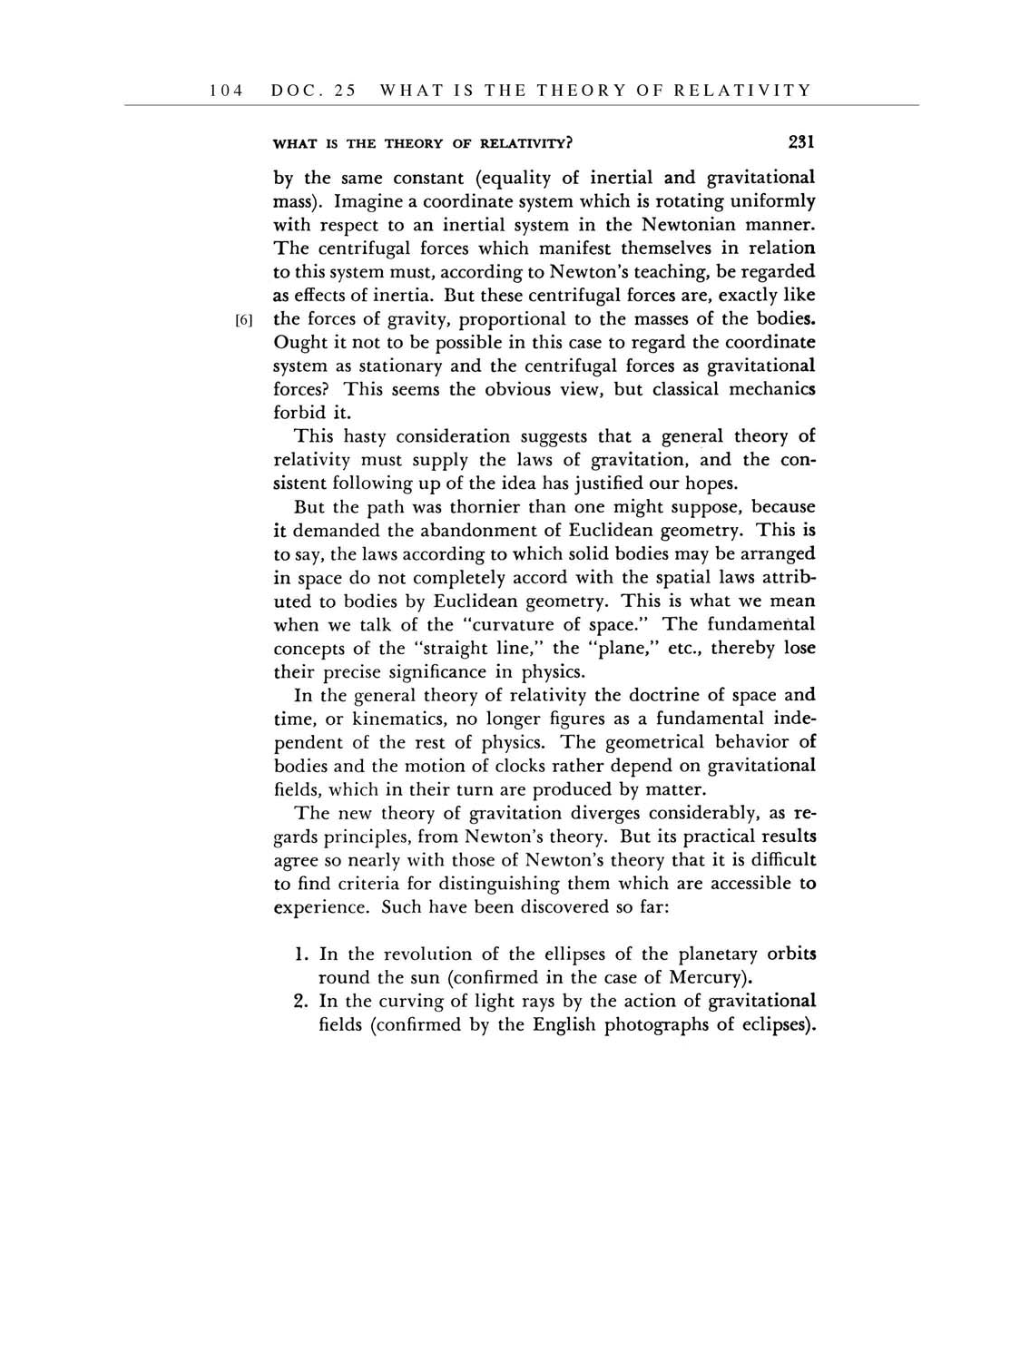 Volume 7: The Berlin Years: Writings, 1918-1921 (English translation supplement) page 104